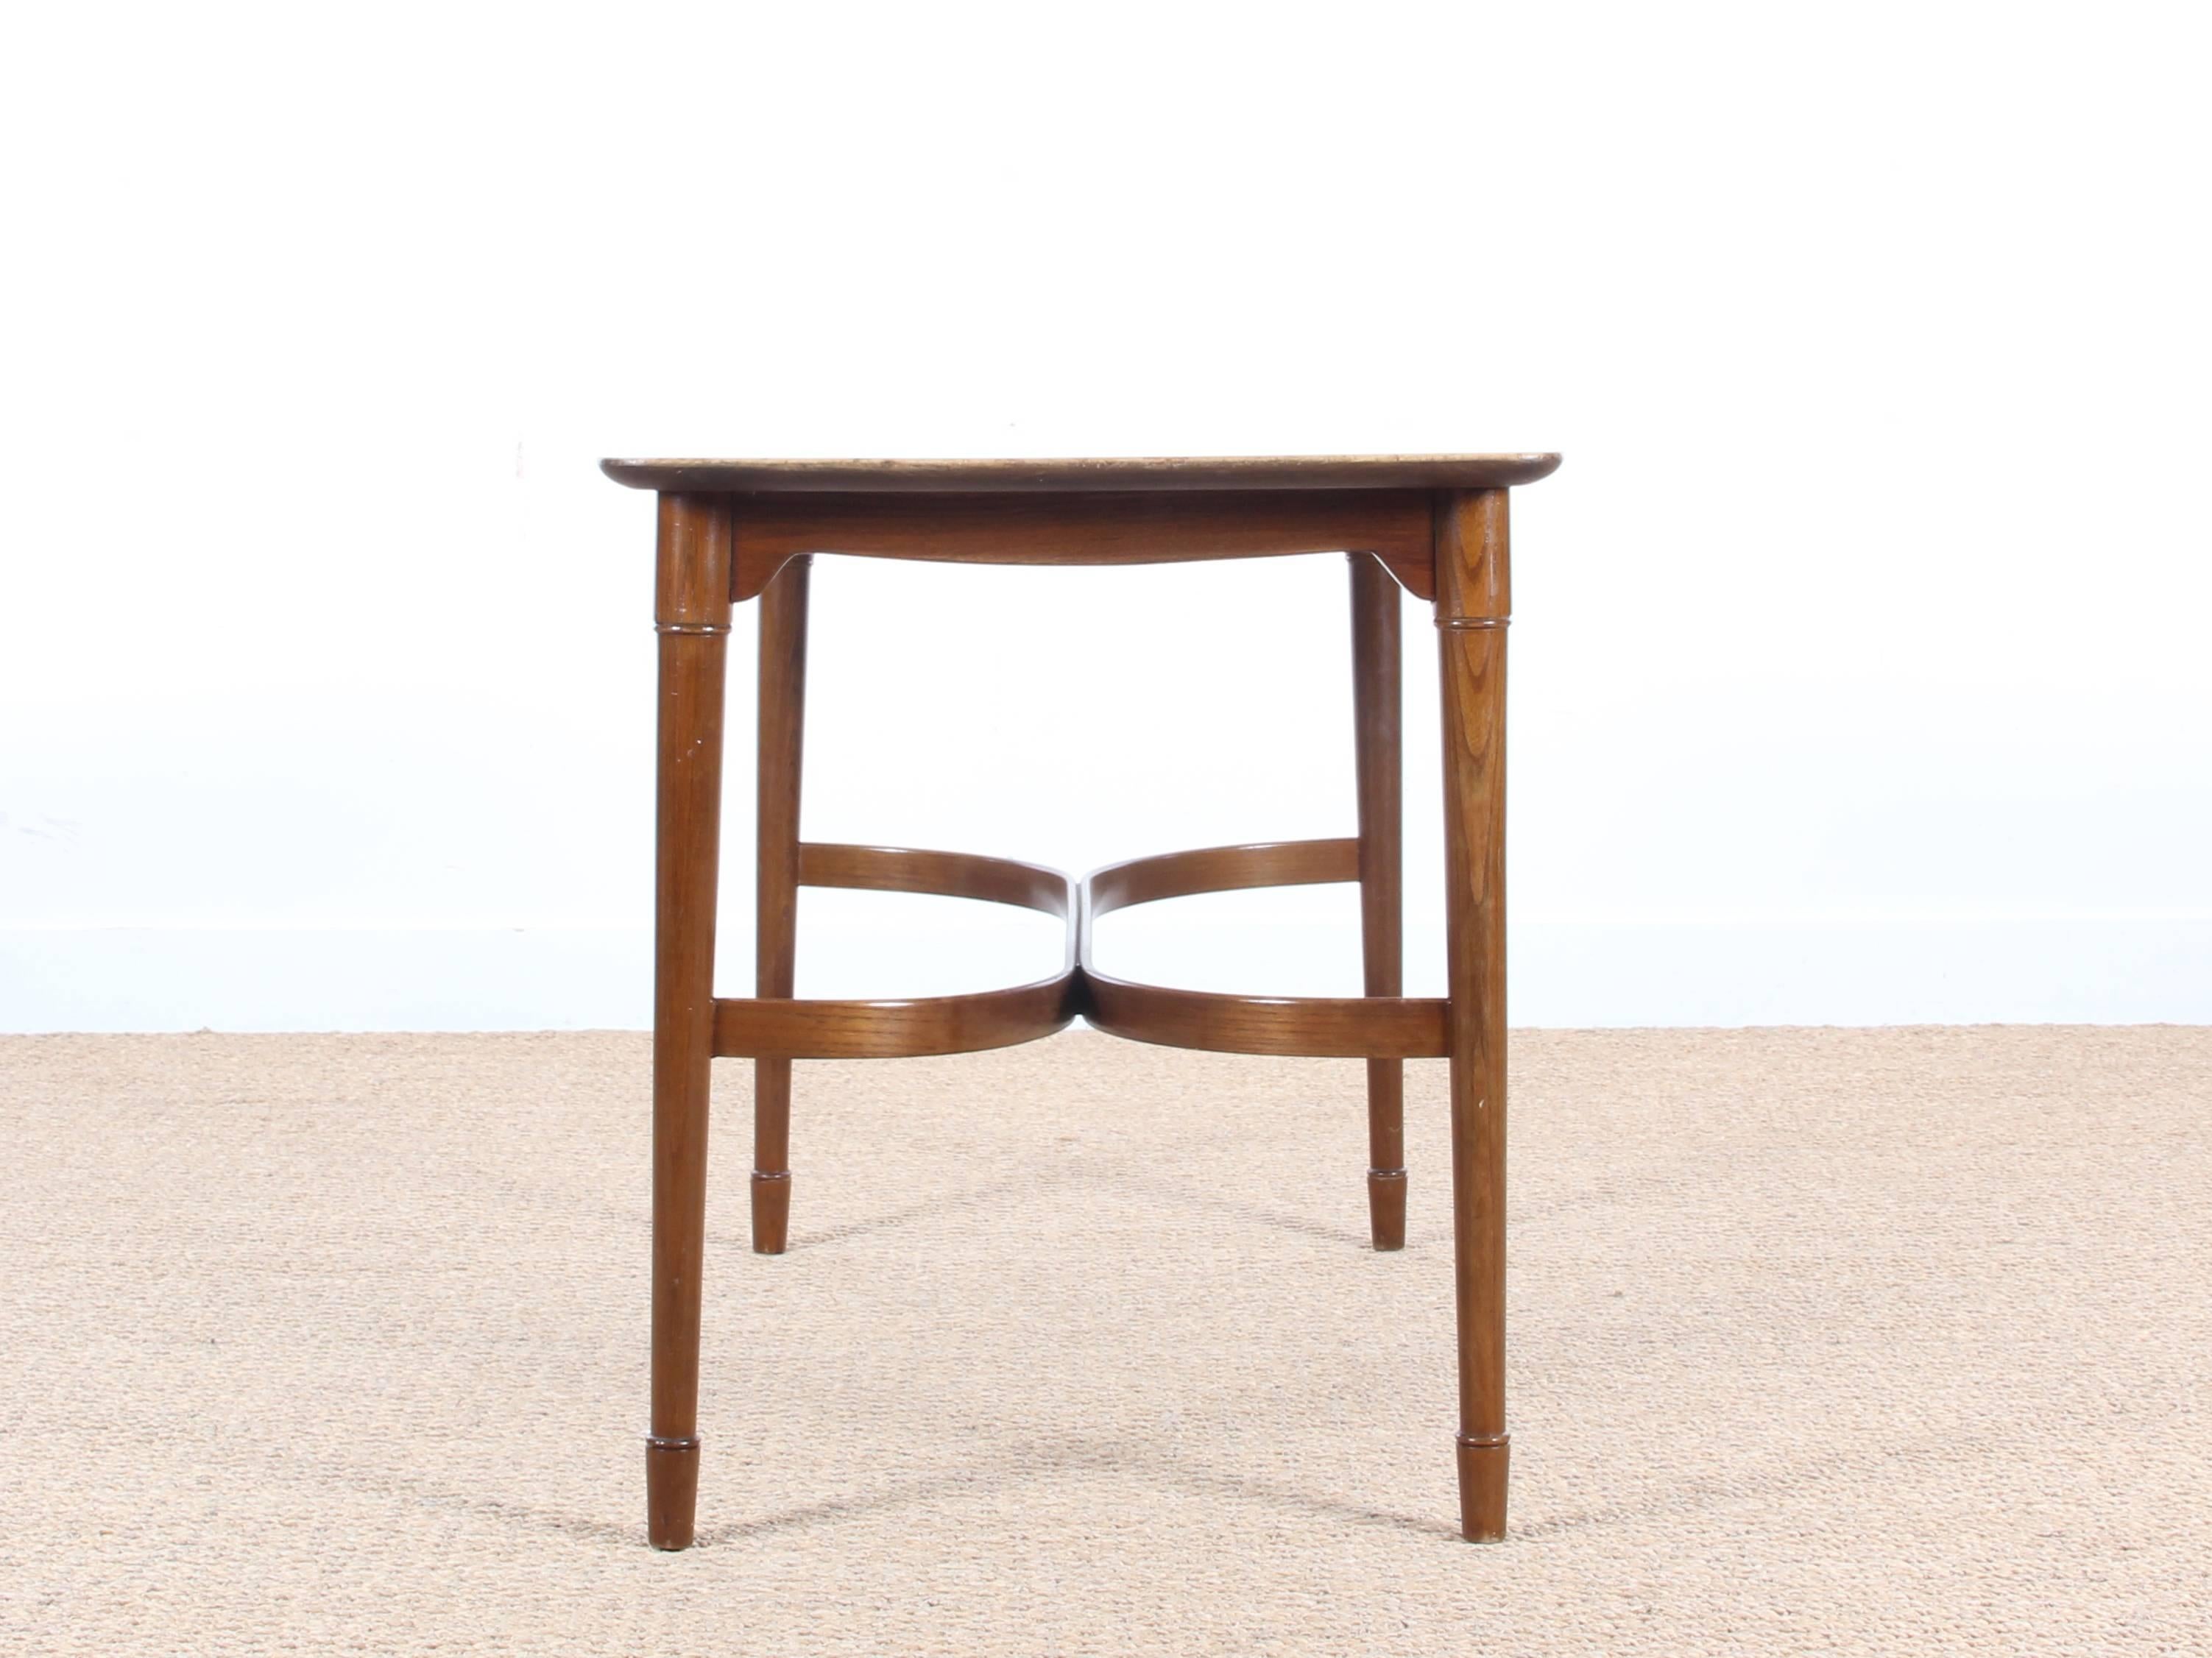 Mid-Century Modern coffee table in in walnut and mahogany. Danish cabinet maker work.